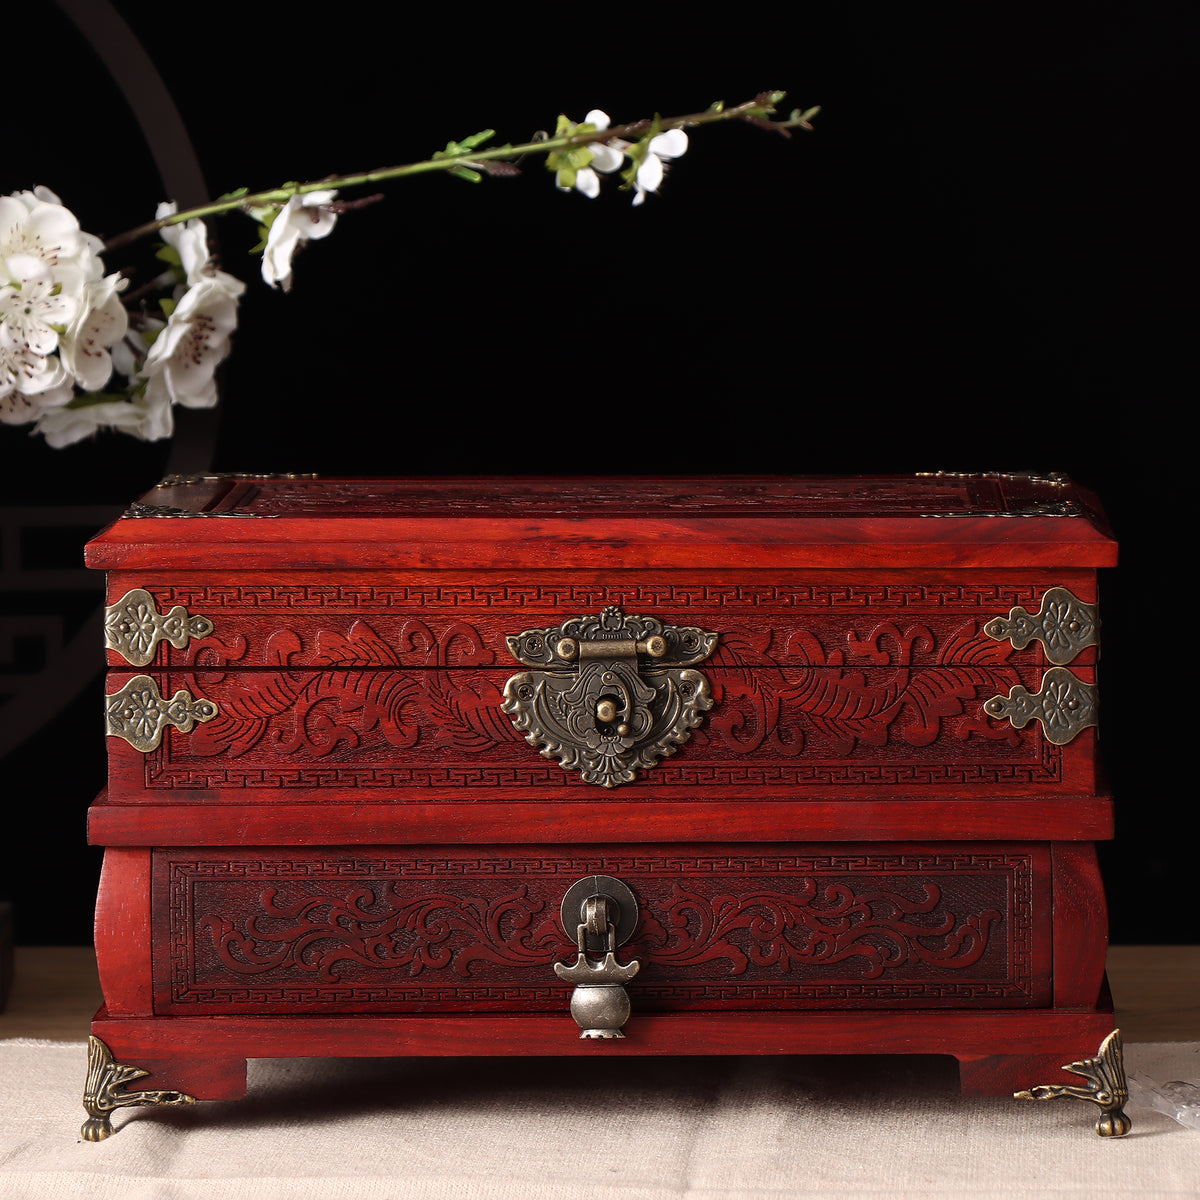 Rosewood Jewelry Box--For enjoyment